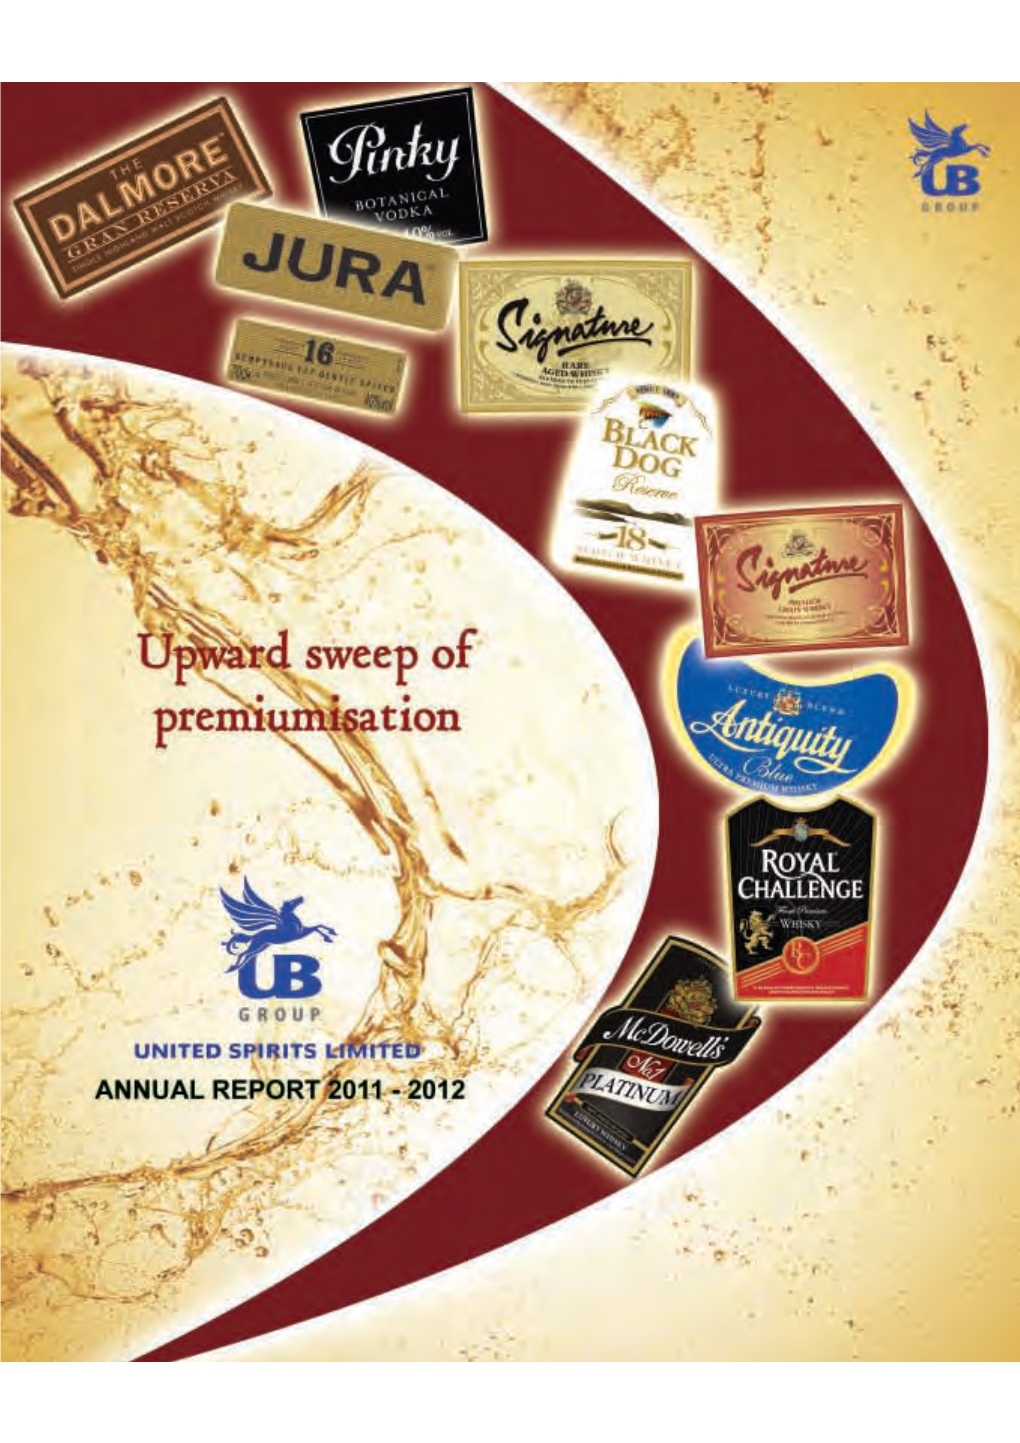 United Spirits Limited Is One of the Only Two Companies in the World with a Dozen Brands Among the Top 100 Spirits Brands Worldwide”